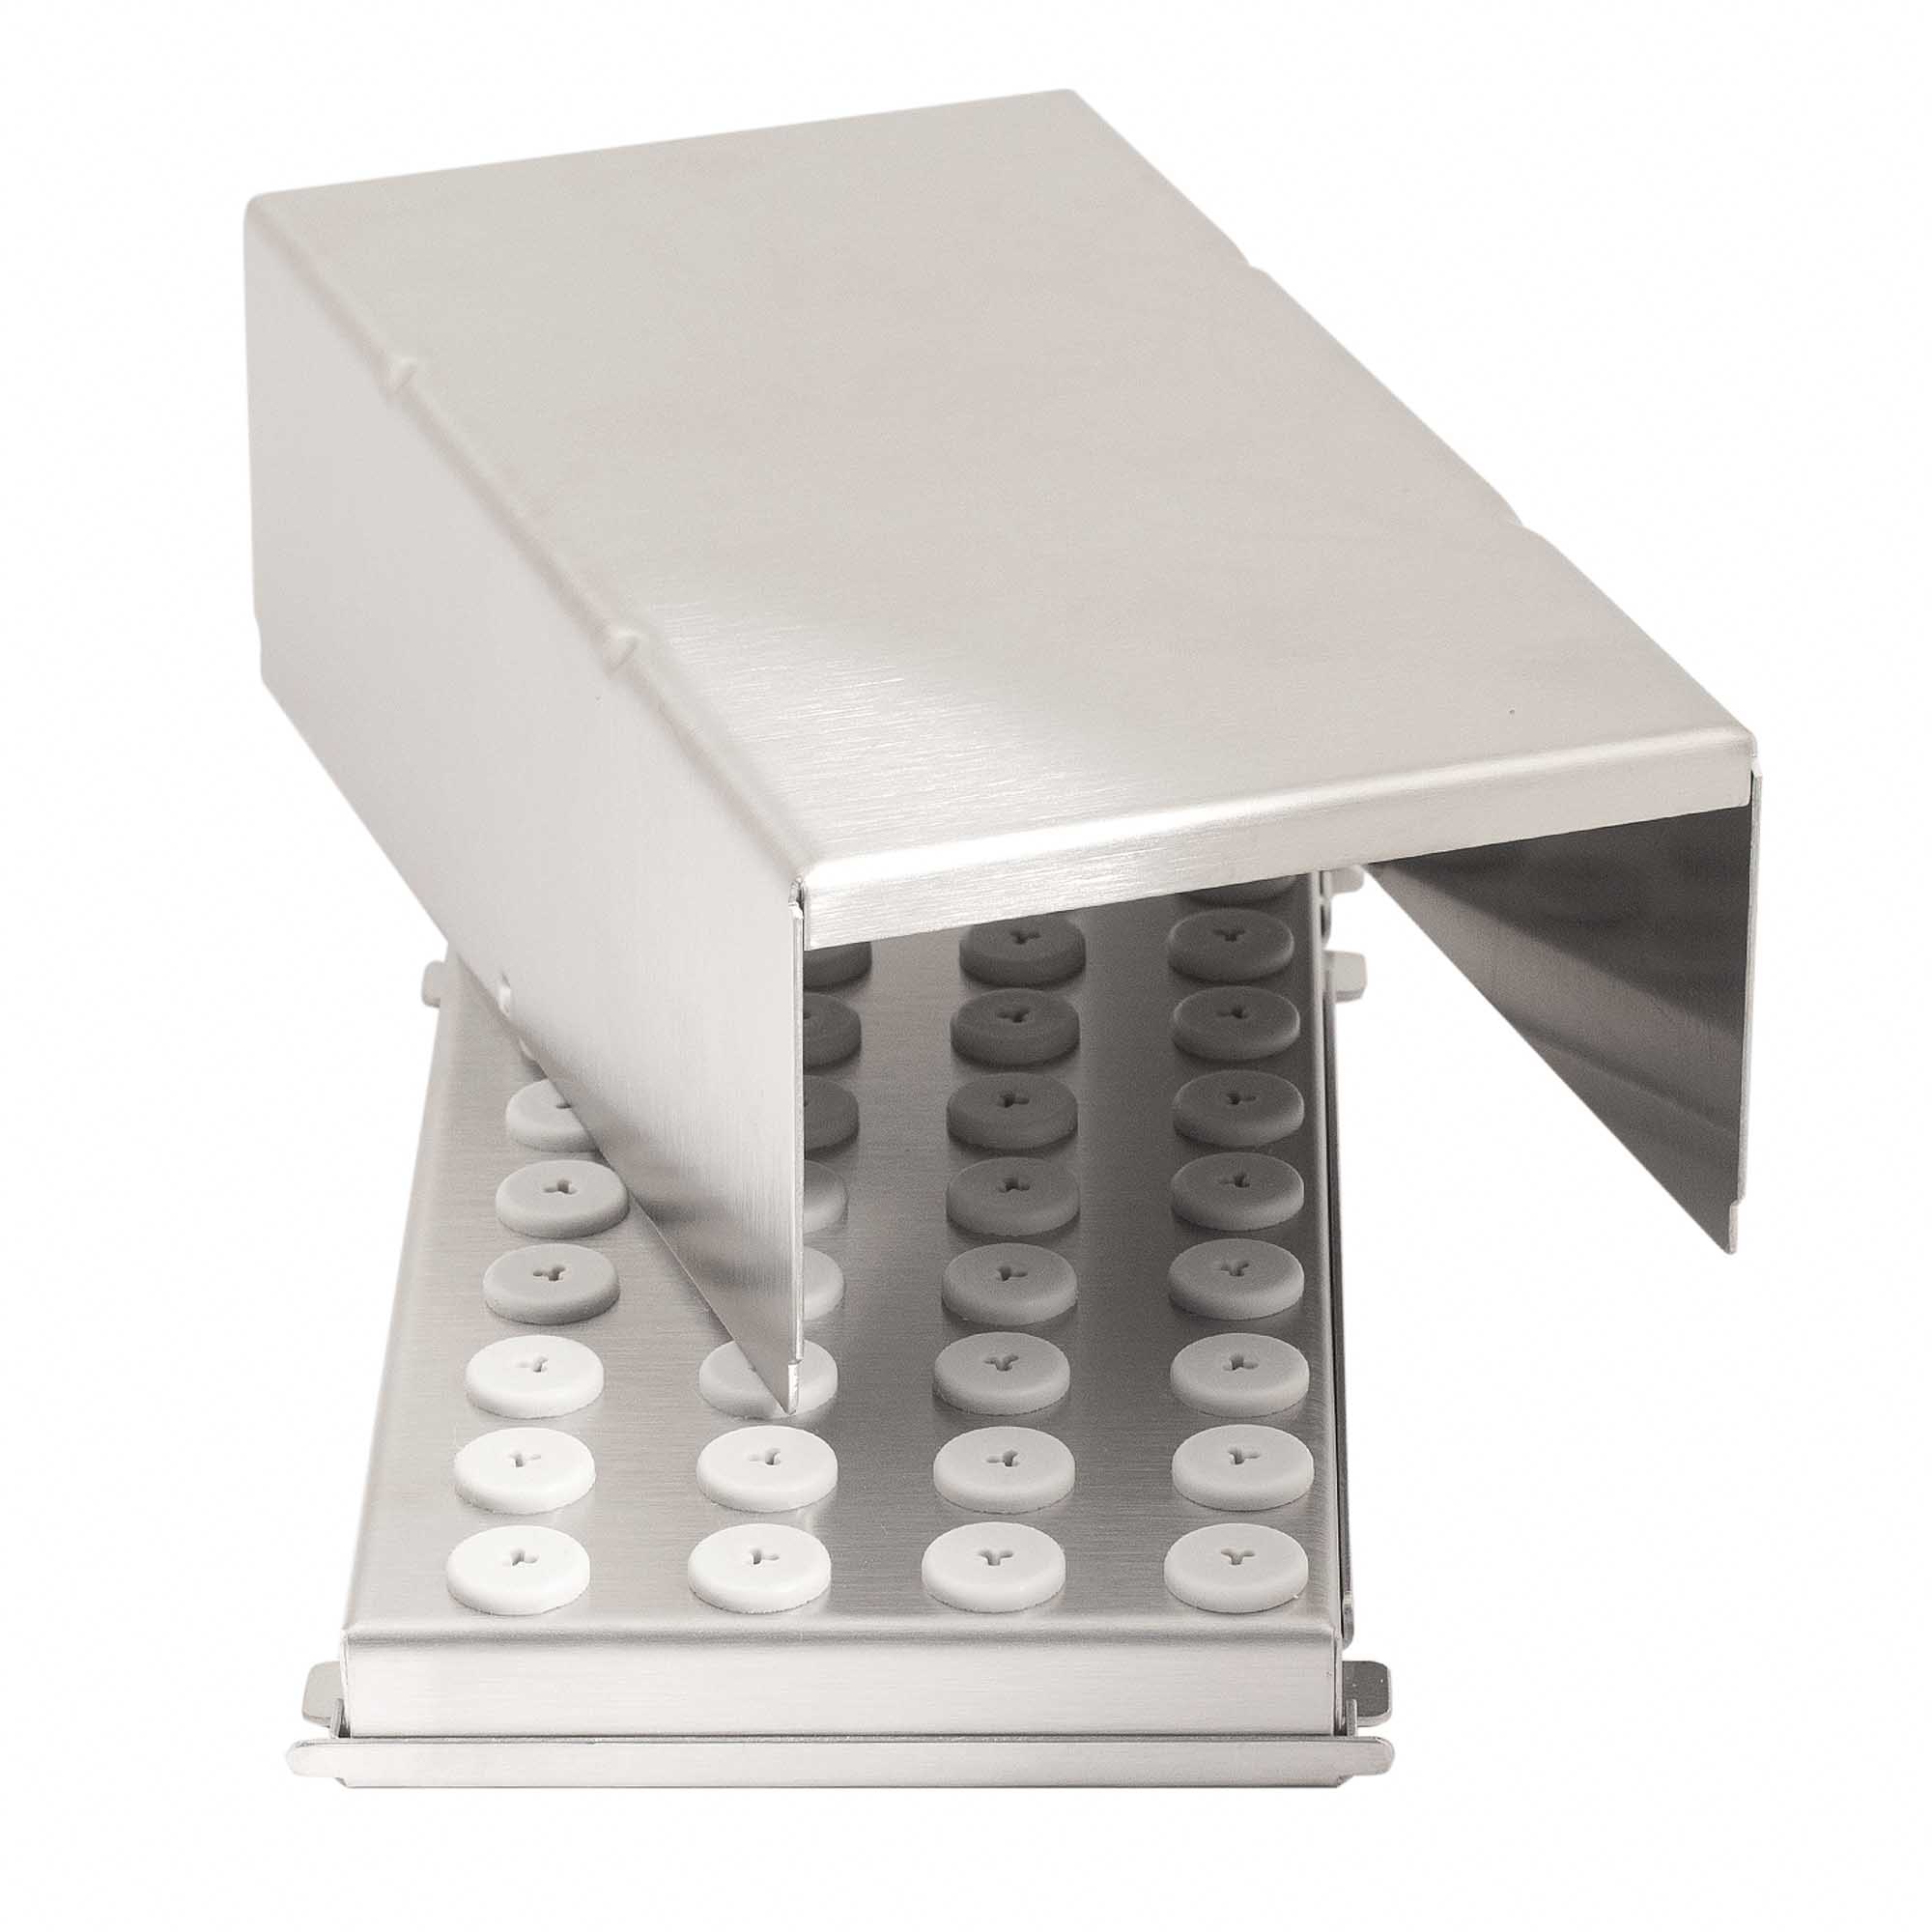 BS151 Bur Block, Stainless Steel with Grommets, 40 FG or 40 HP or 40 RA, Non-Corrosive, Sterilizable